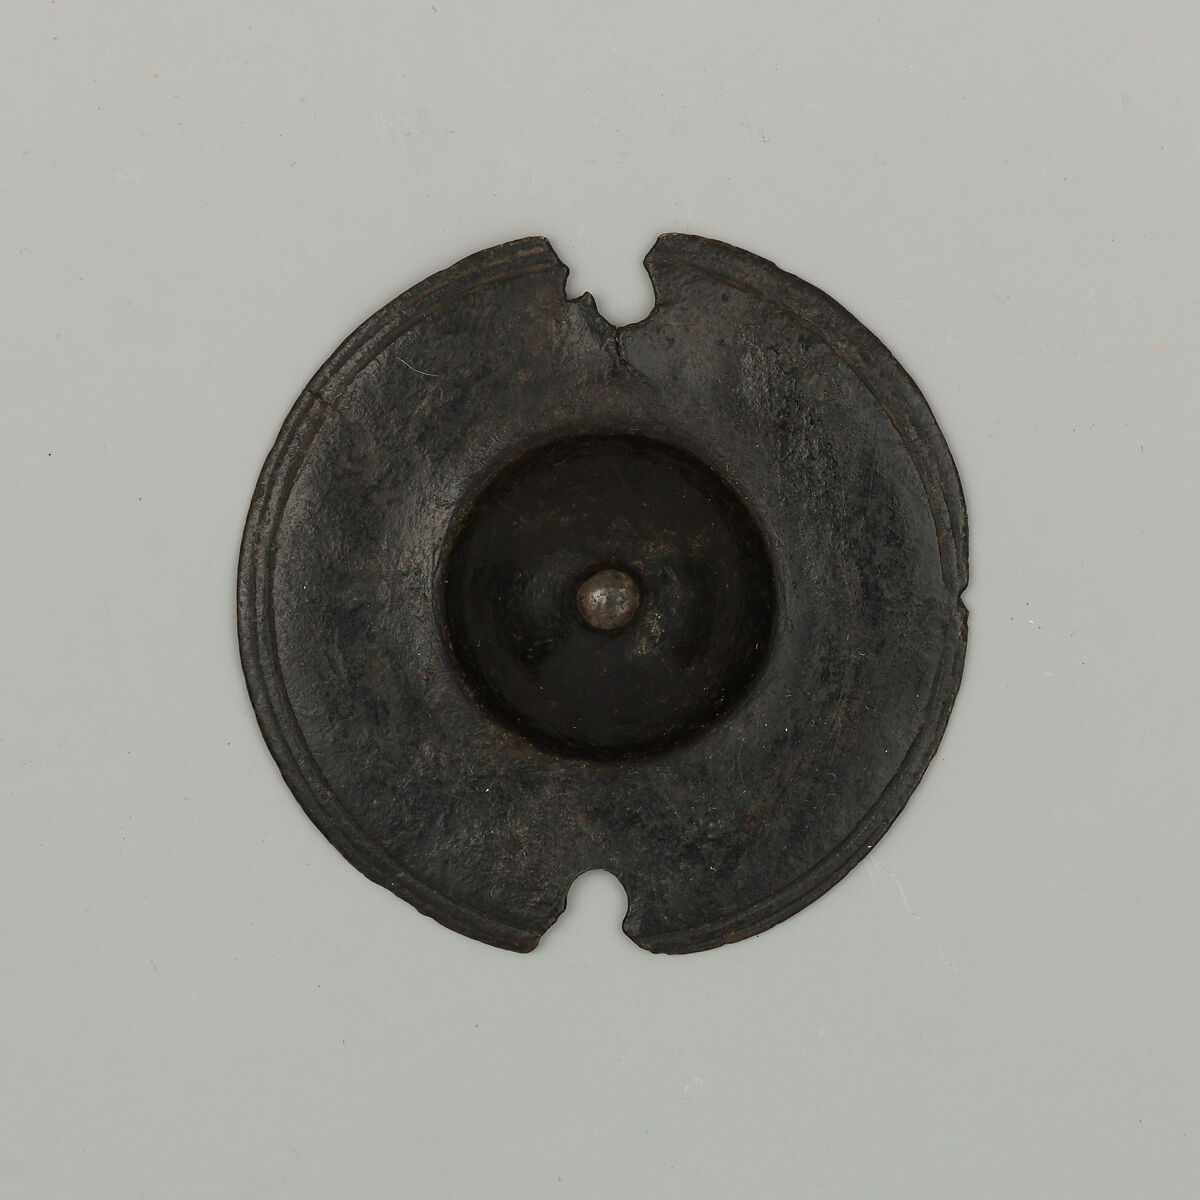 Bit Boss, Copper alloy, probably French 